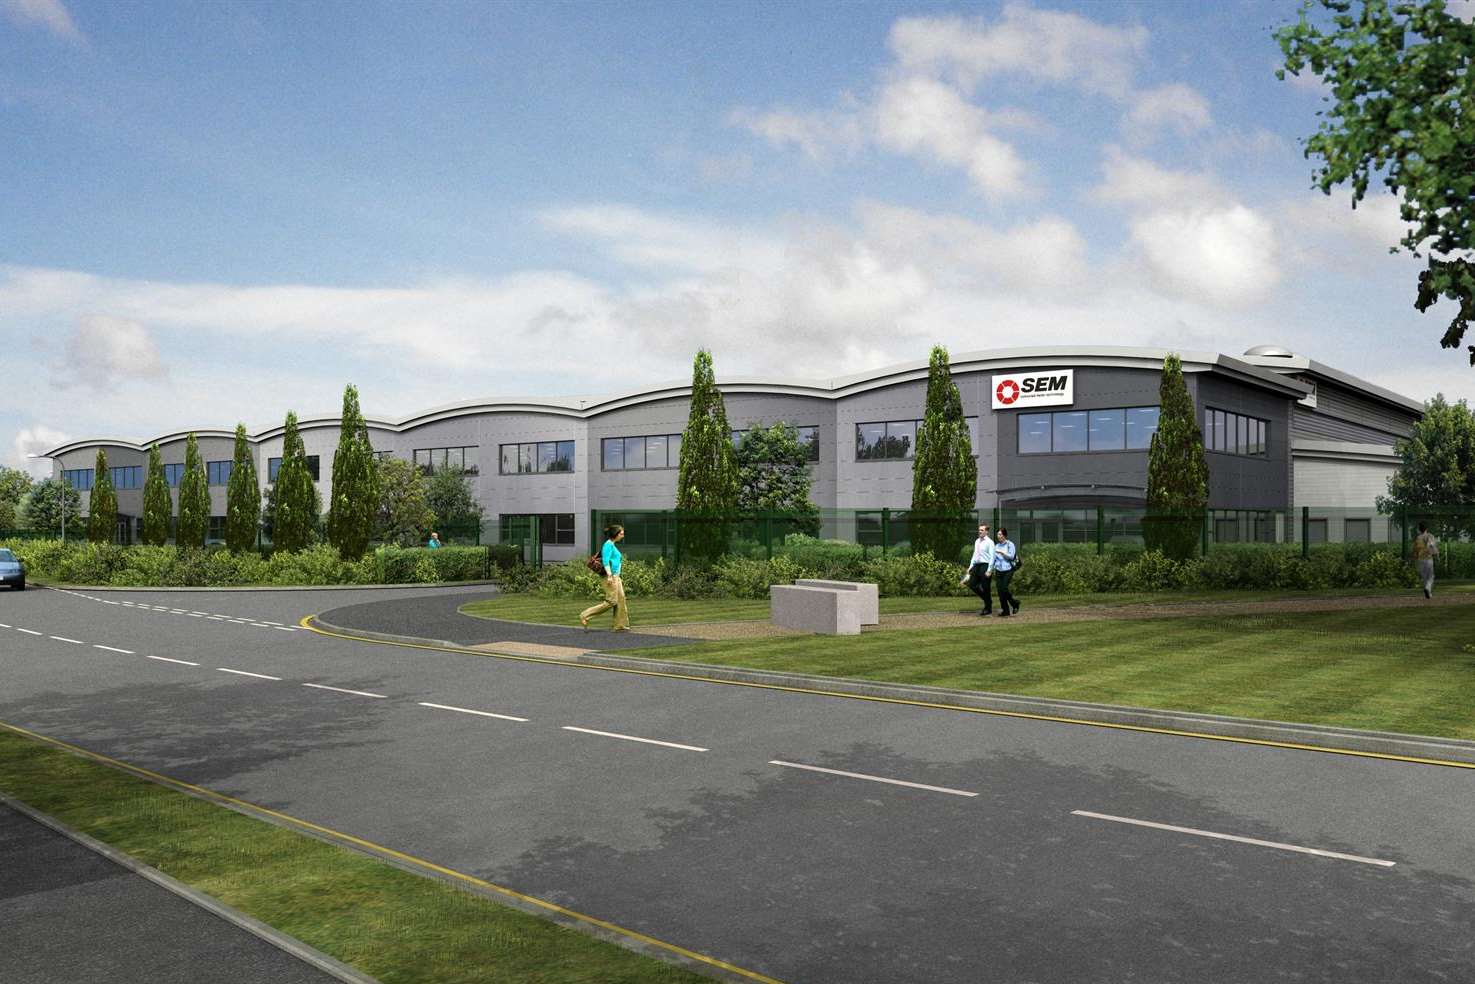 High technology manufacturing group SEM is set to move to Dartford. The group has signed an agreement with developer Prologis for a 122,500 square foot state-of-the-art headquarters at The Bridge